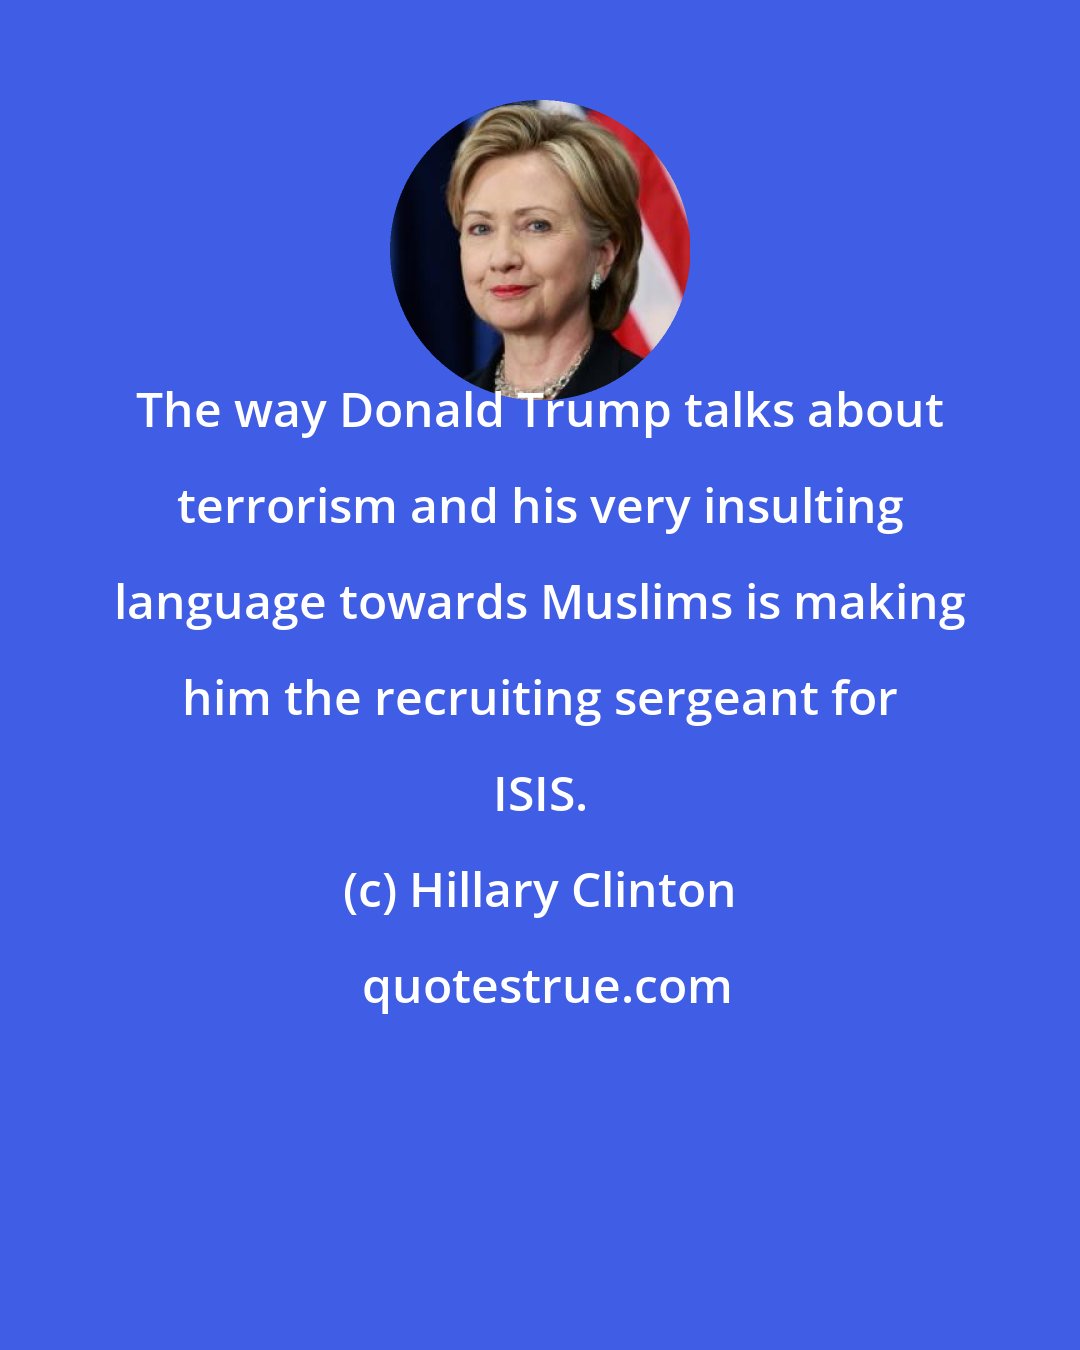 Hillary Clinton: The way Donald Trump talks about terrorism and his very insulting language towards Muslims is making him the recruiting sergeant for ISIS.